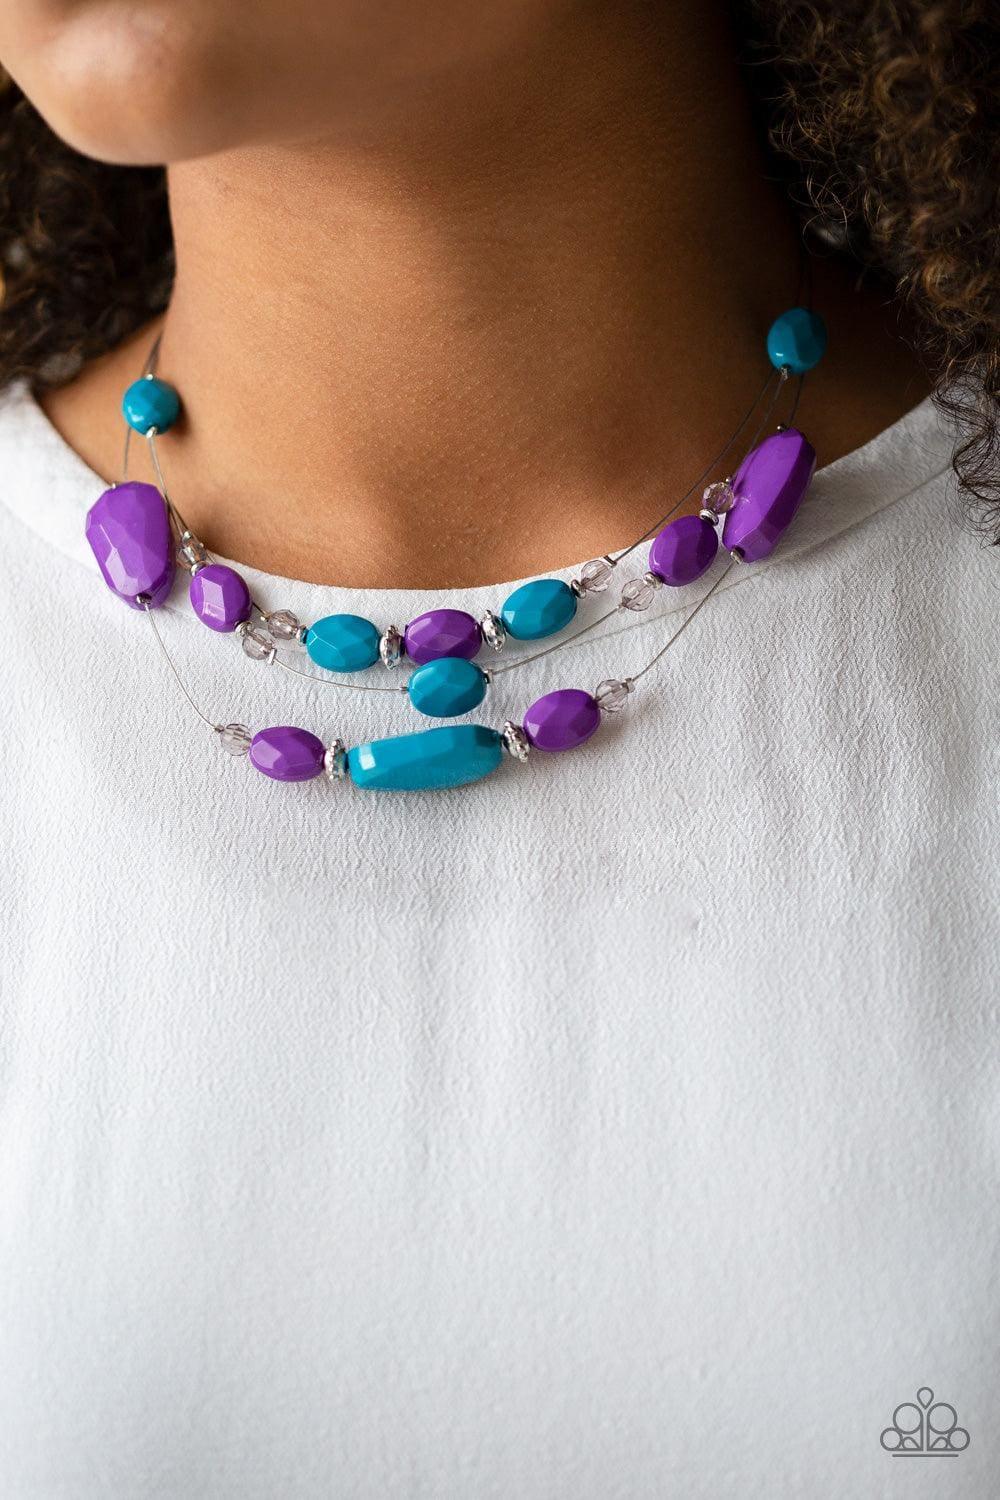 Paparazzi Accessories - Radiant Reflections - Multicolor Necklace - Bling by JessieK